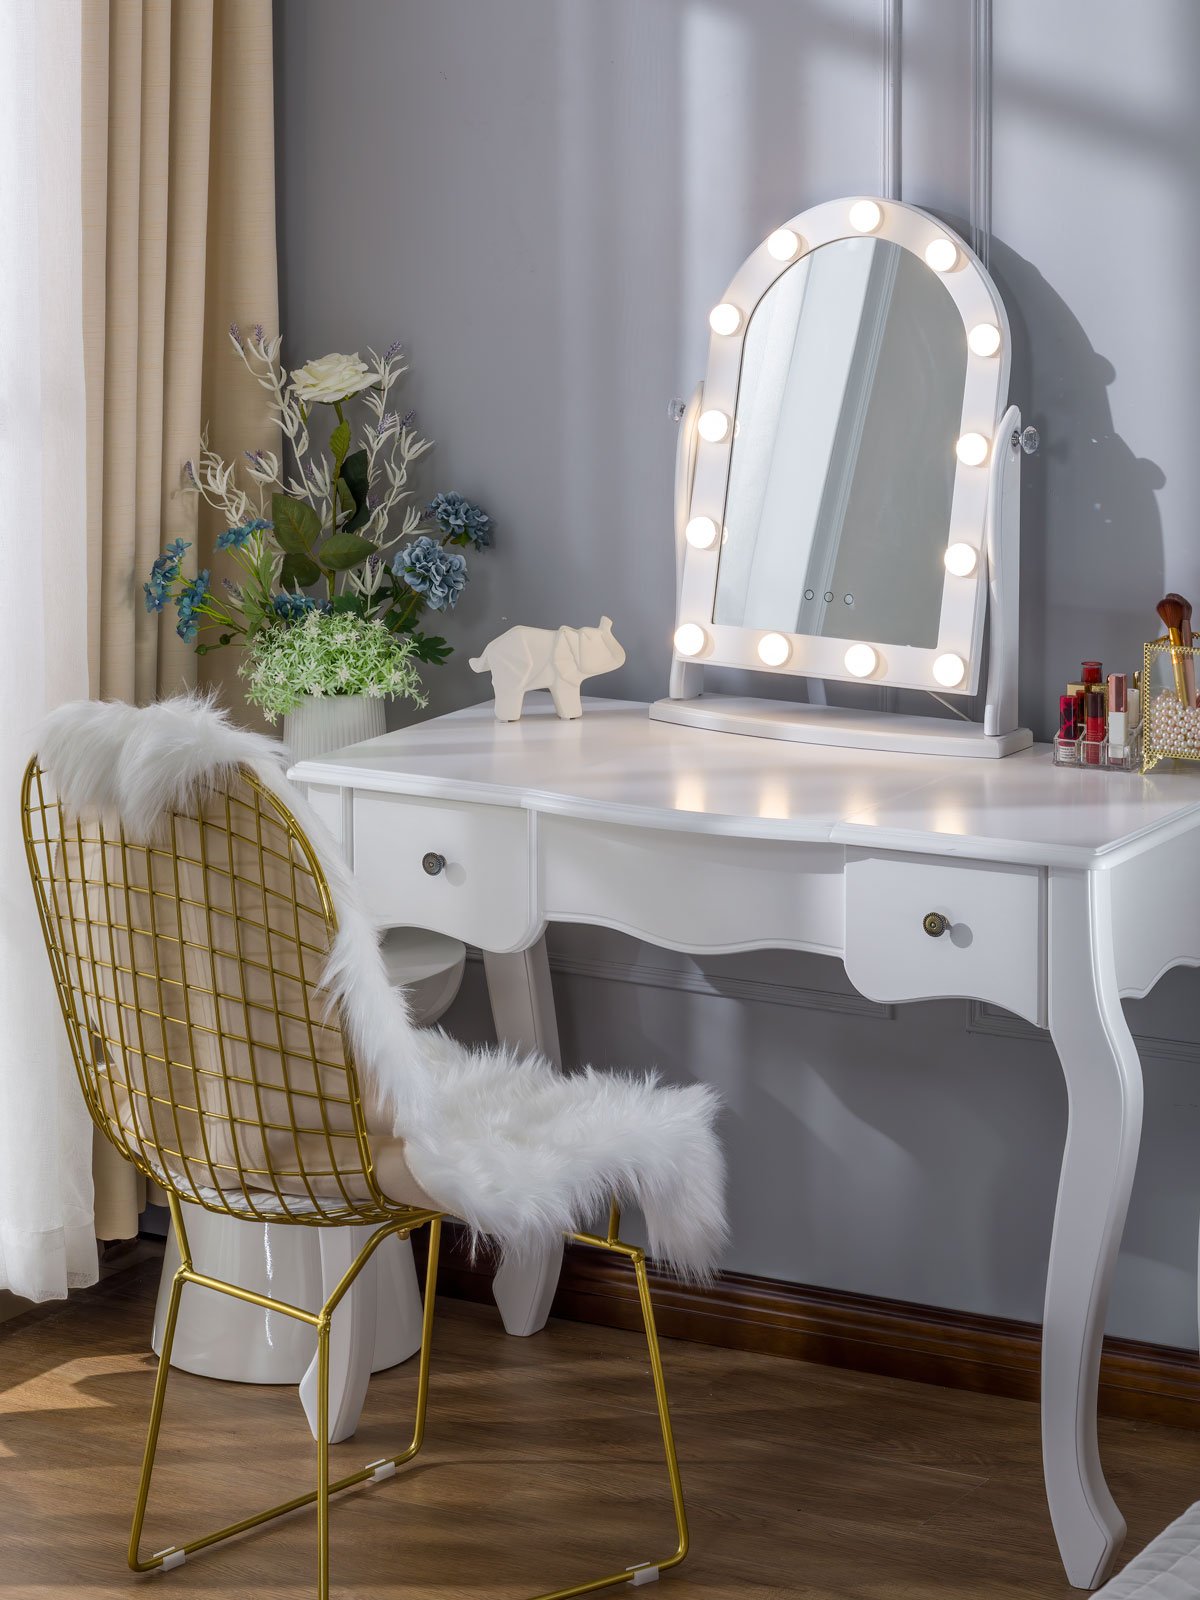 Luxfurni | Hollywood Mirror | Adjustable Table Top Starry 9 Hollywood Vanity Mirror with LED Lights - White